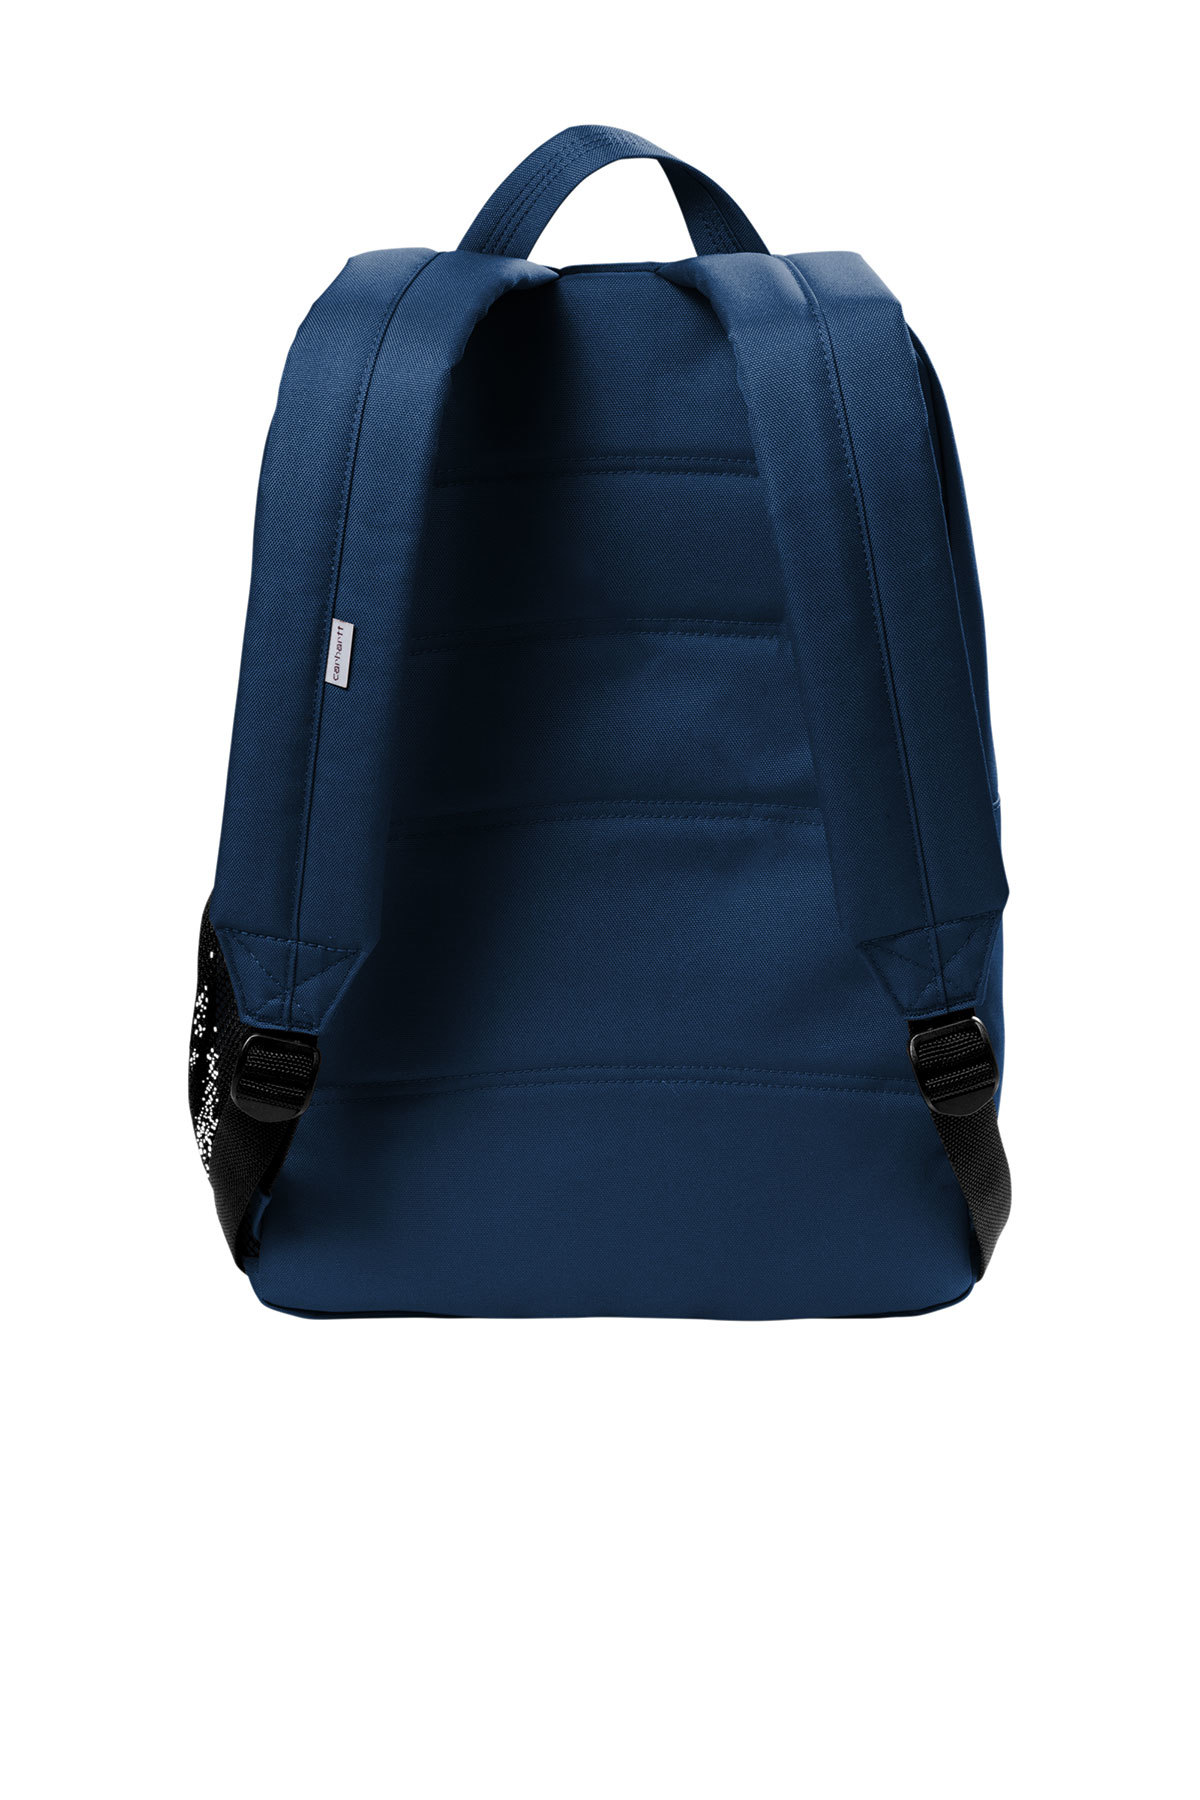 Carhartt Canvas Backpack | Product | Company Casuals